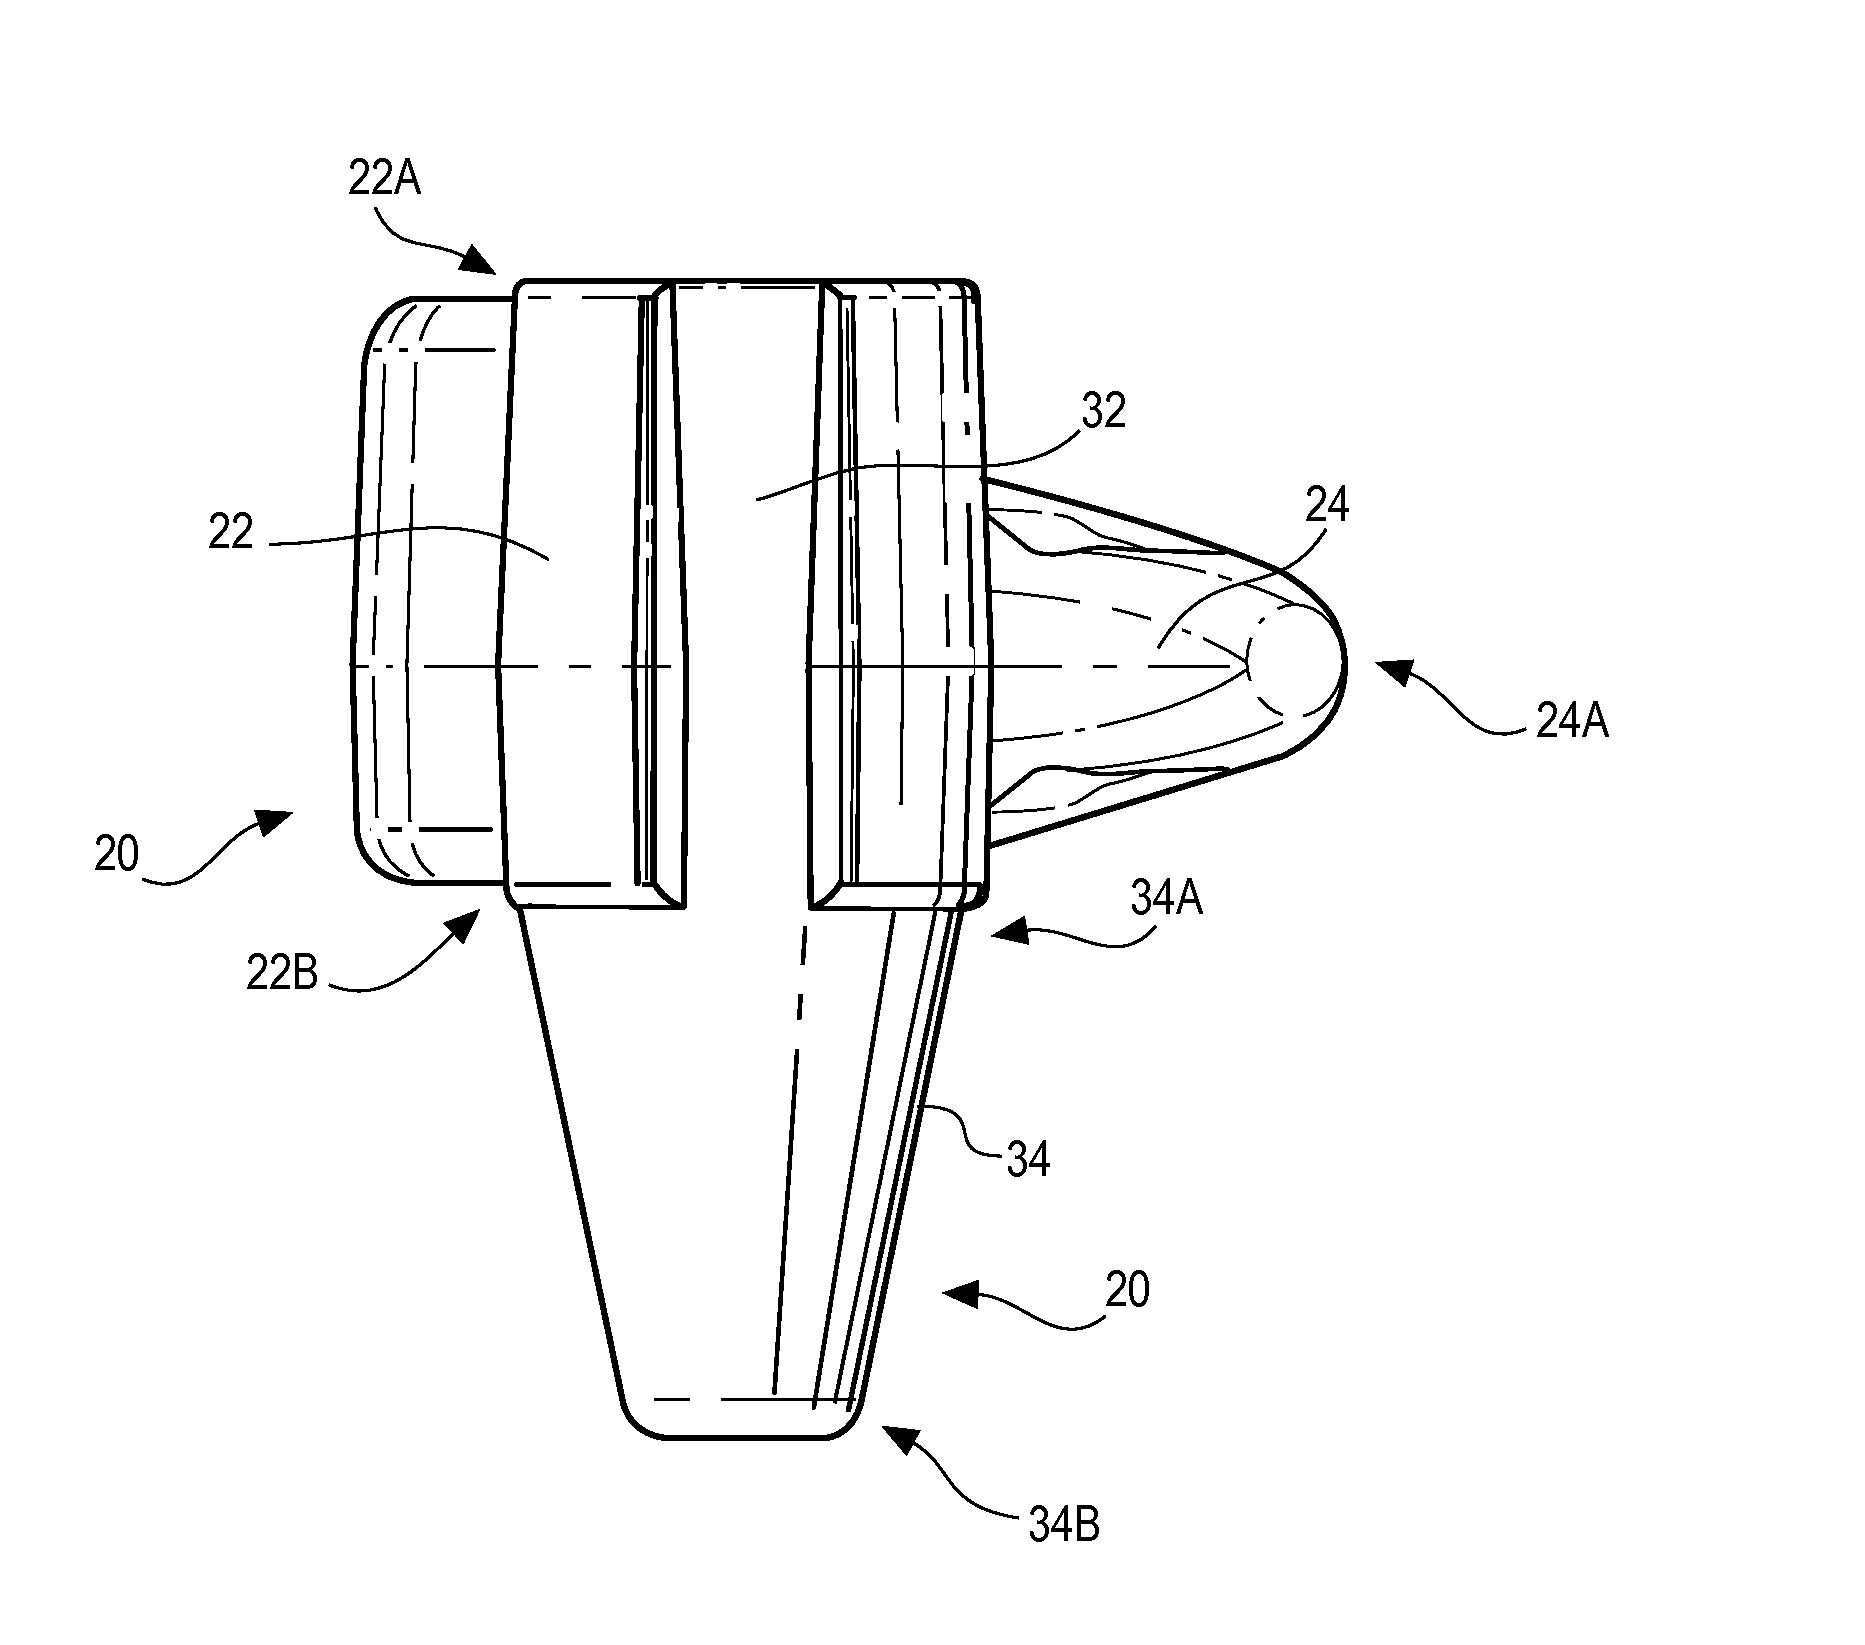 Ear plug with container